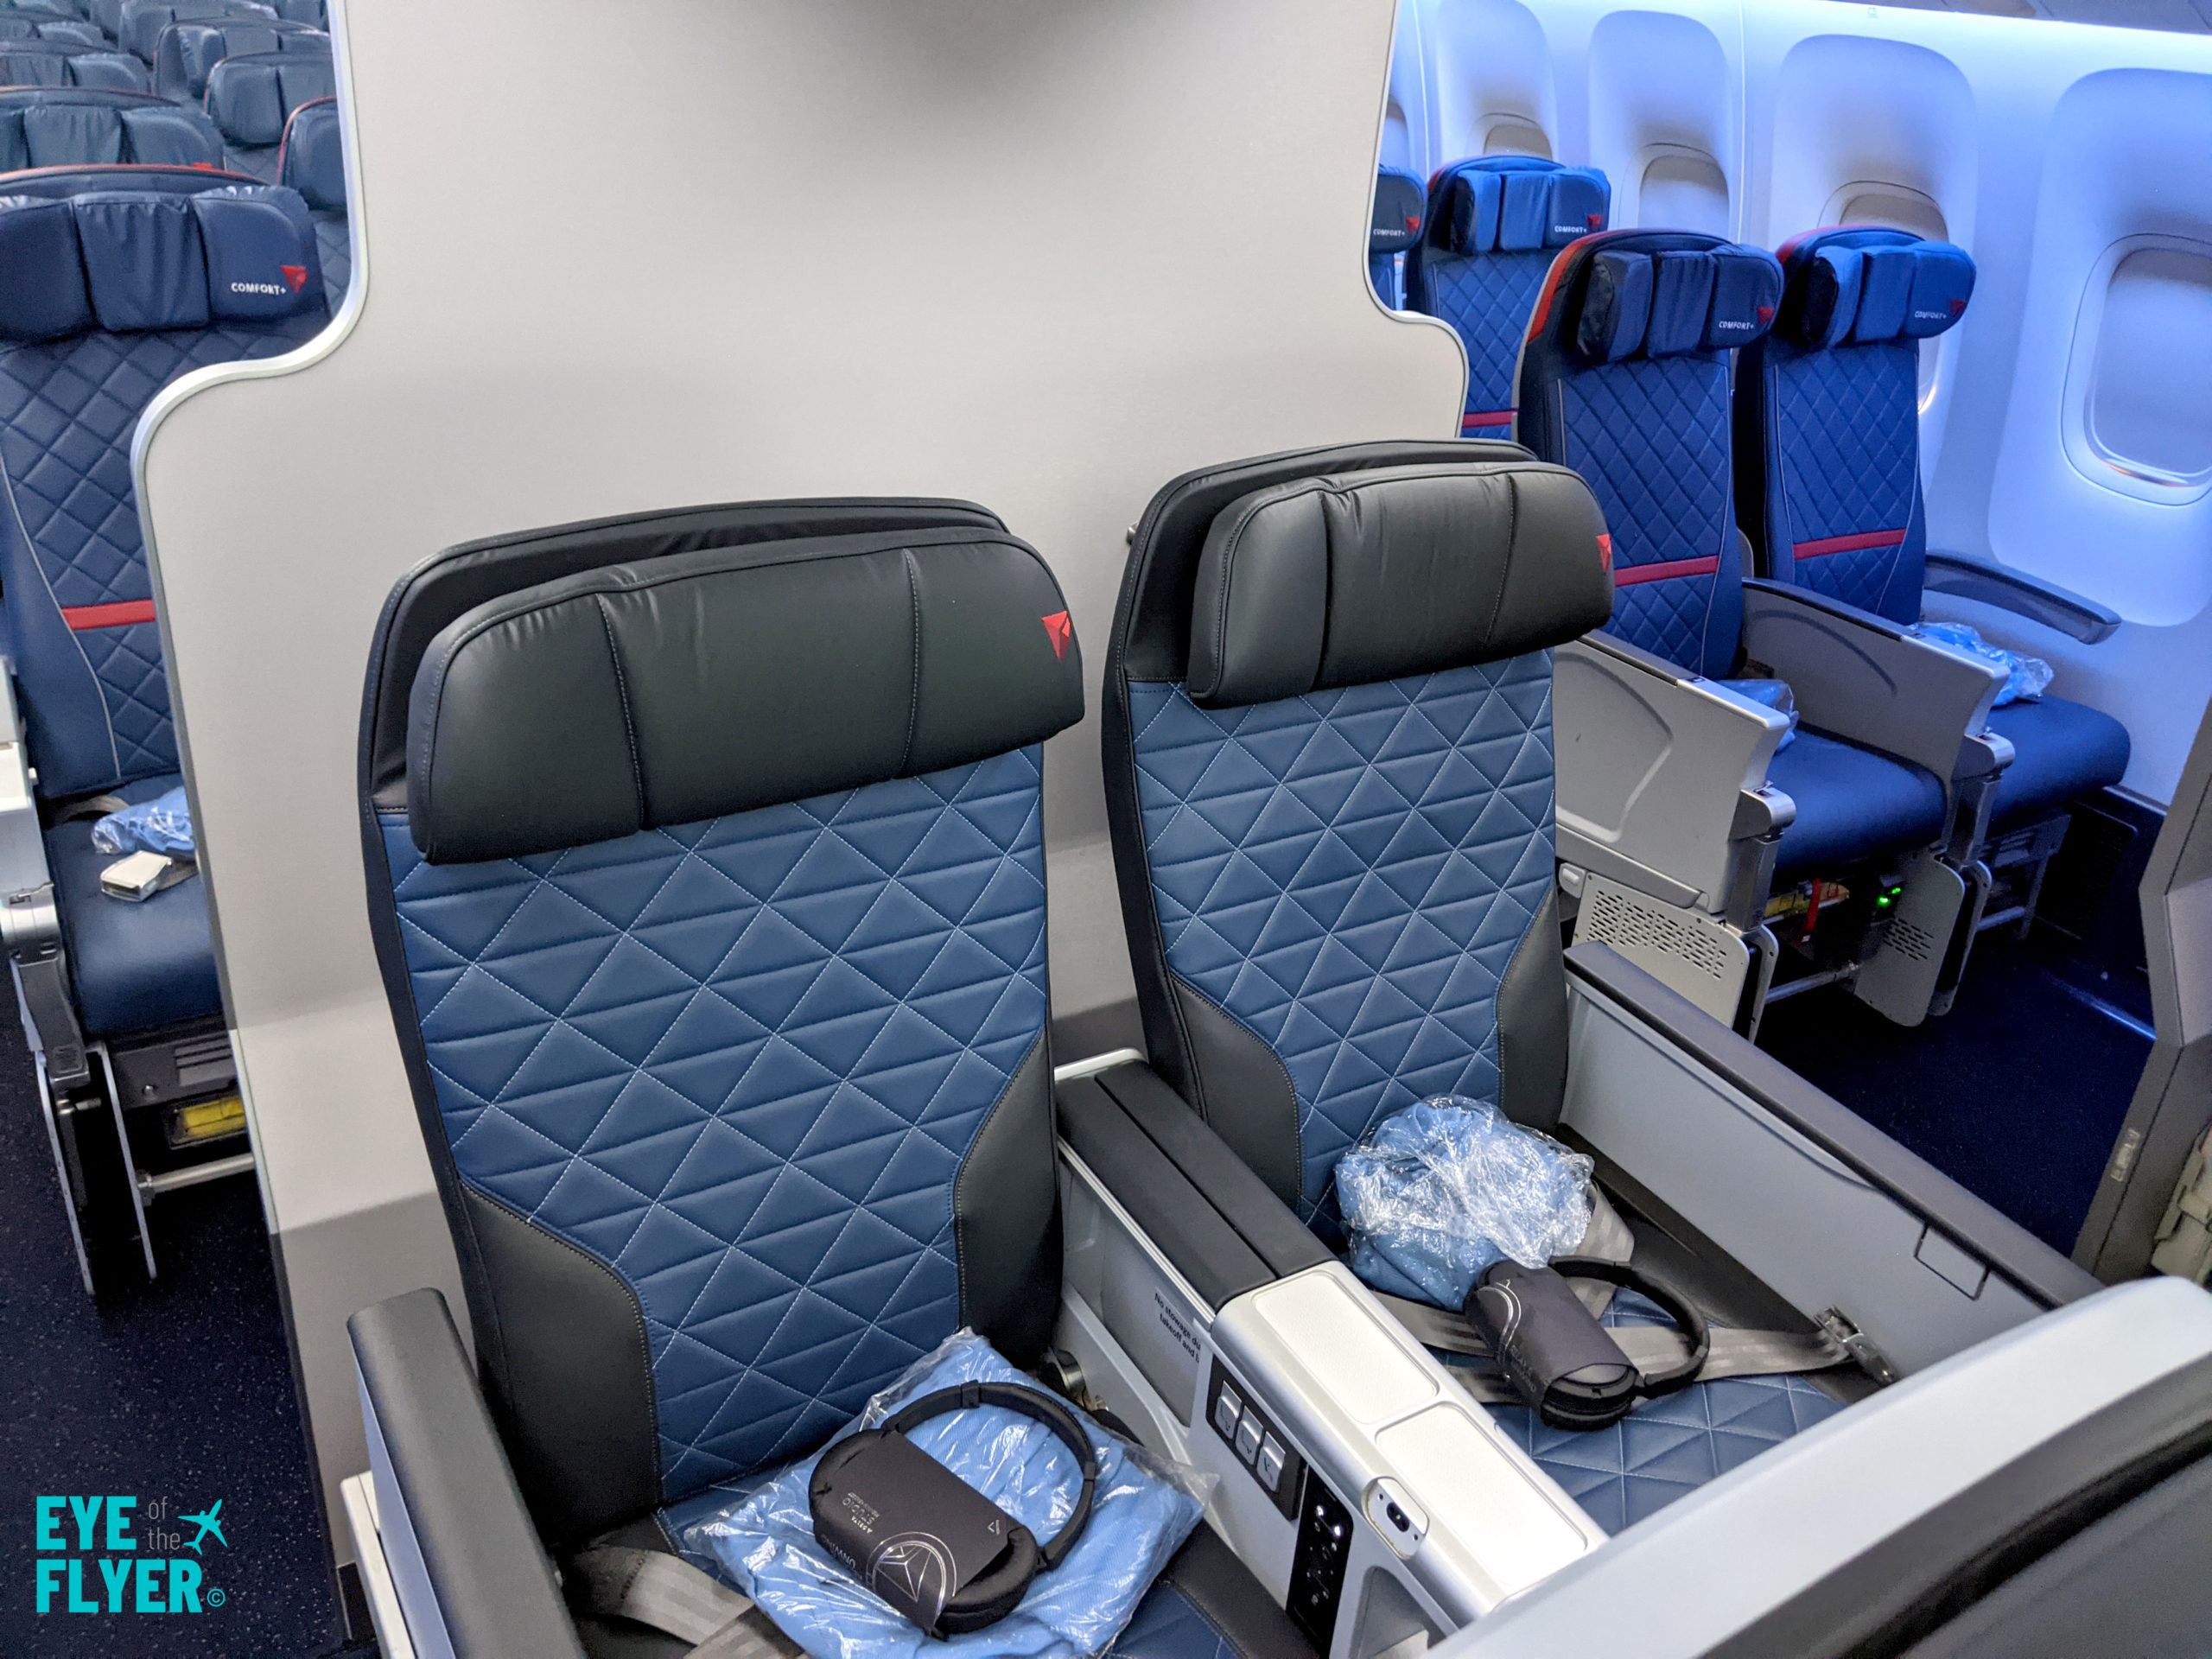 Delta Comfort Plus: Everything You Need To Know